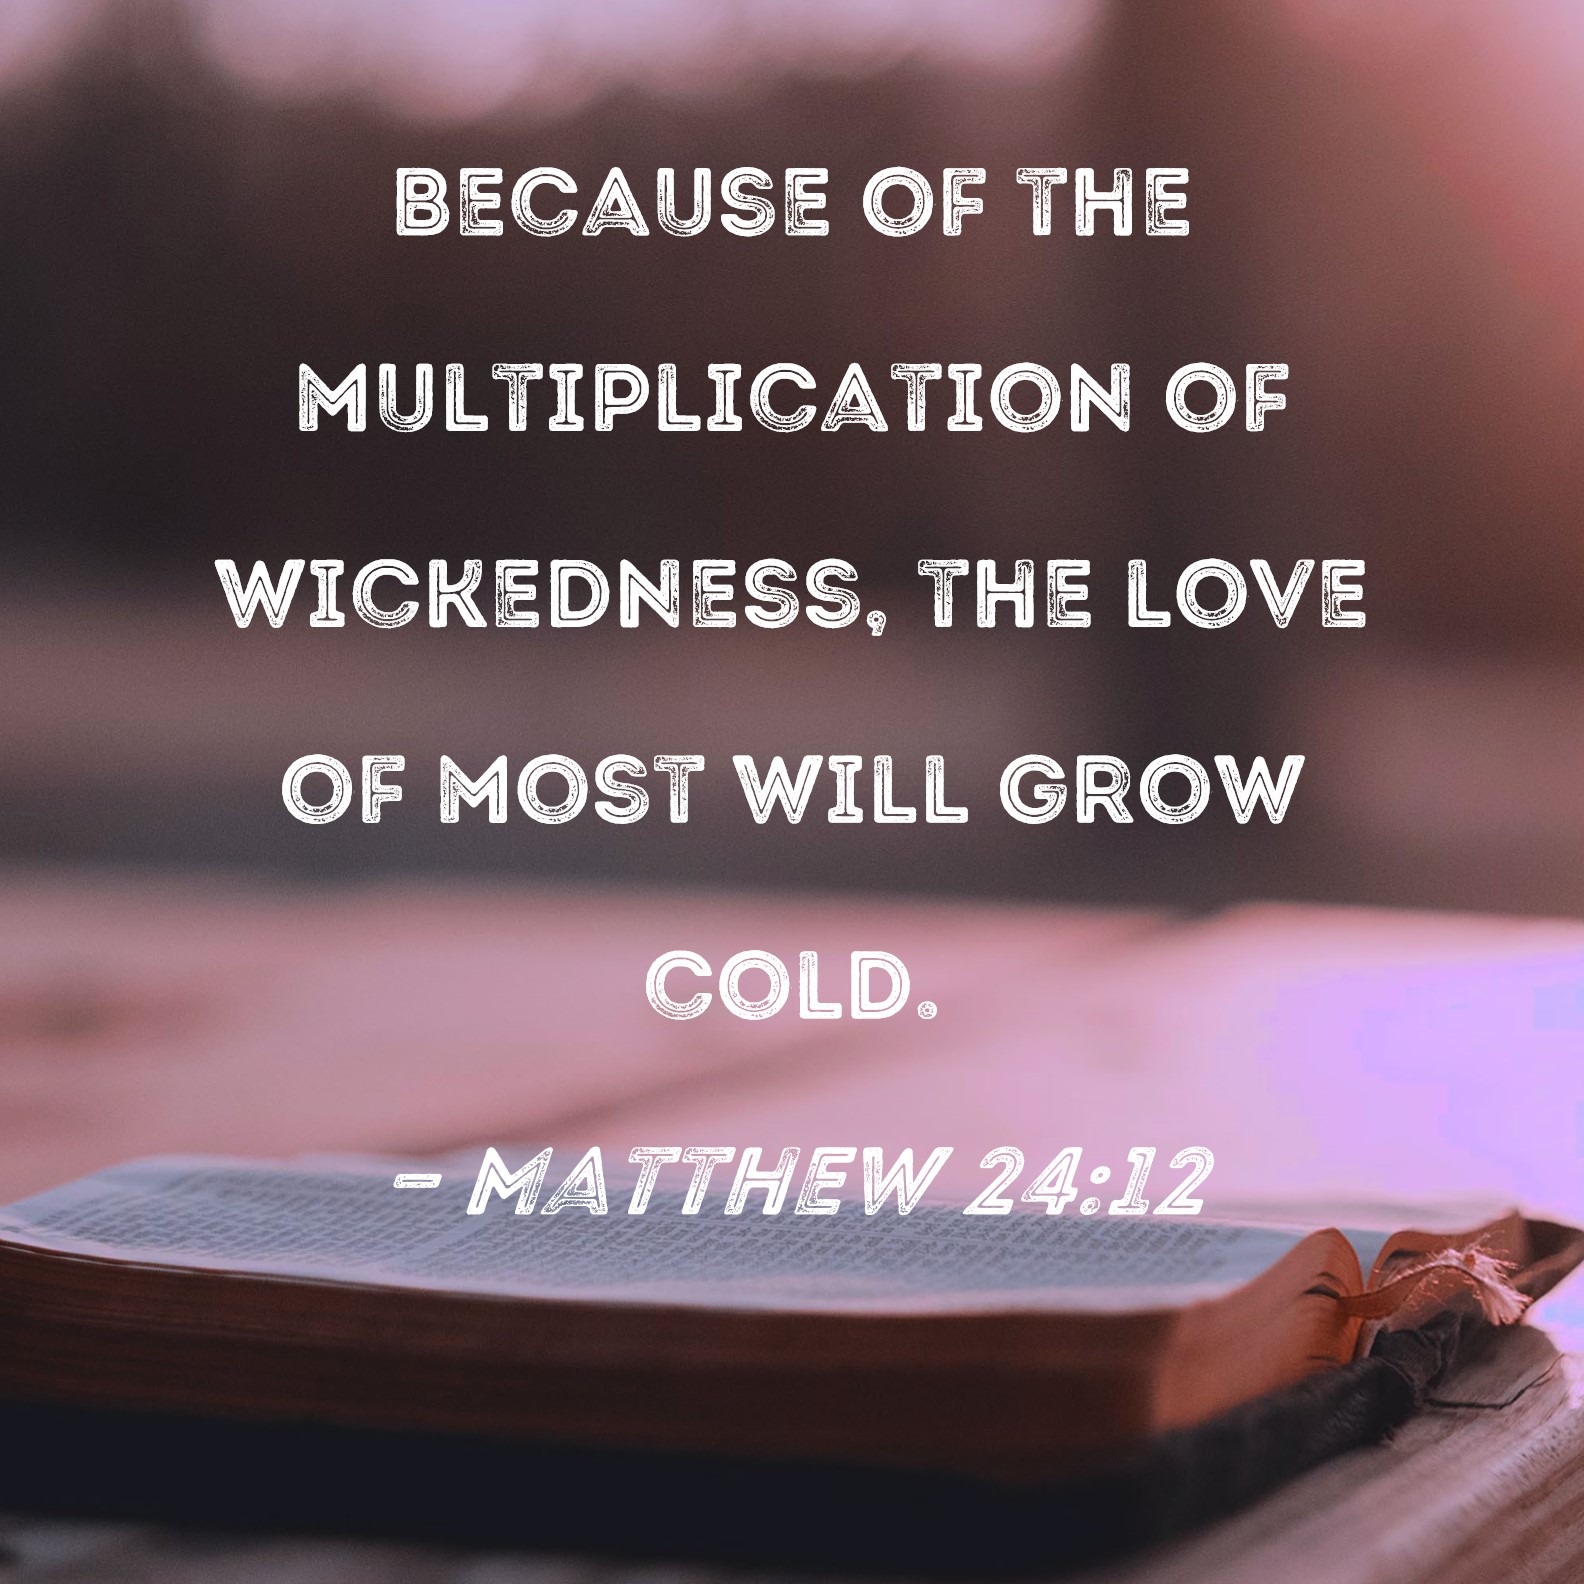 Matthew 2412 Because of the multiplication of wickedness, the love of